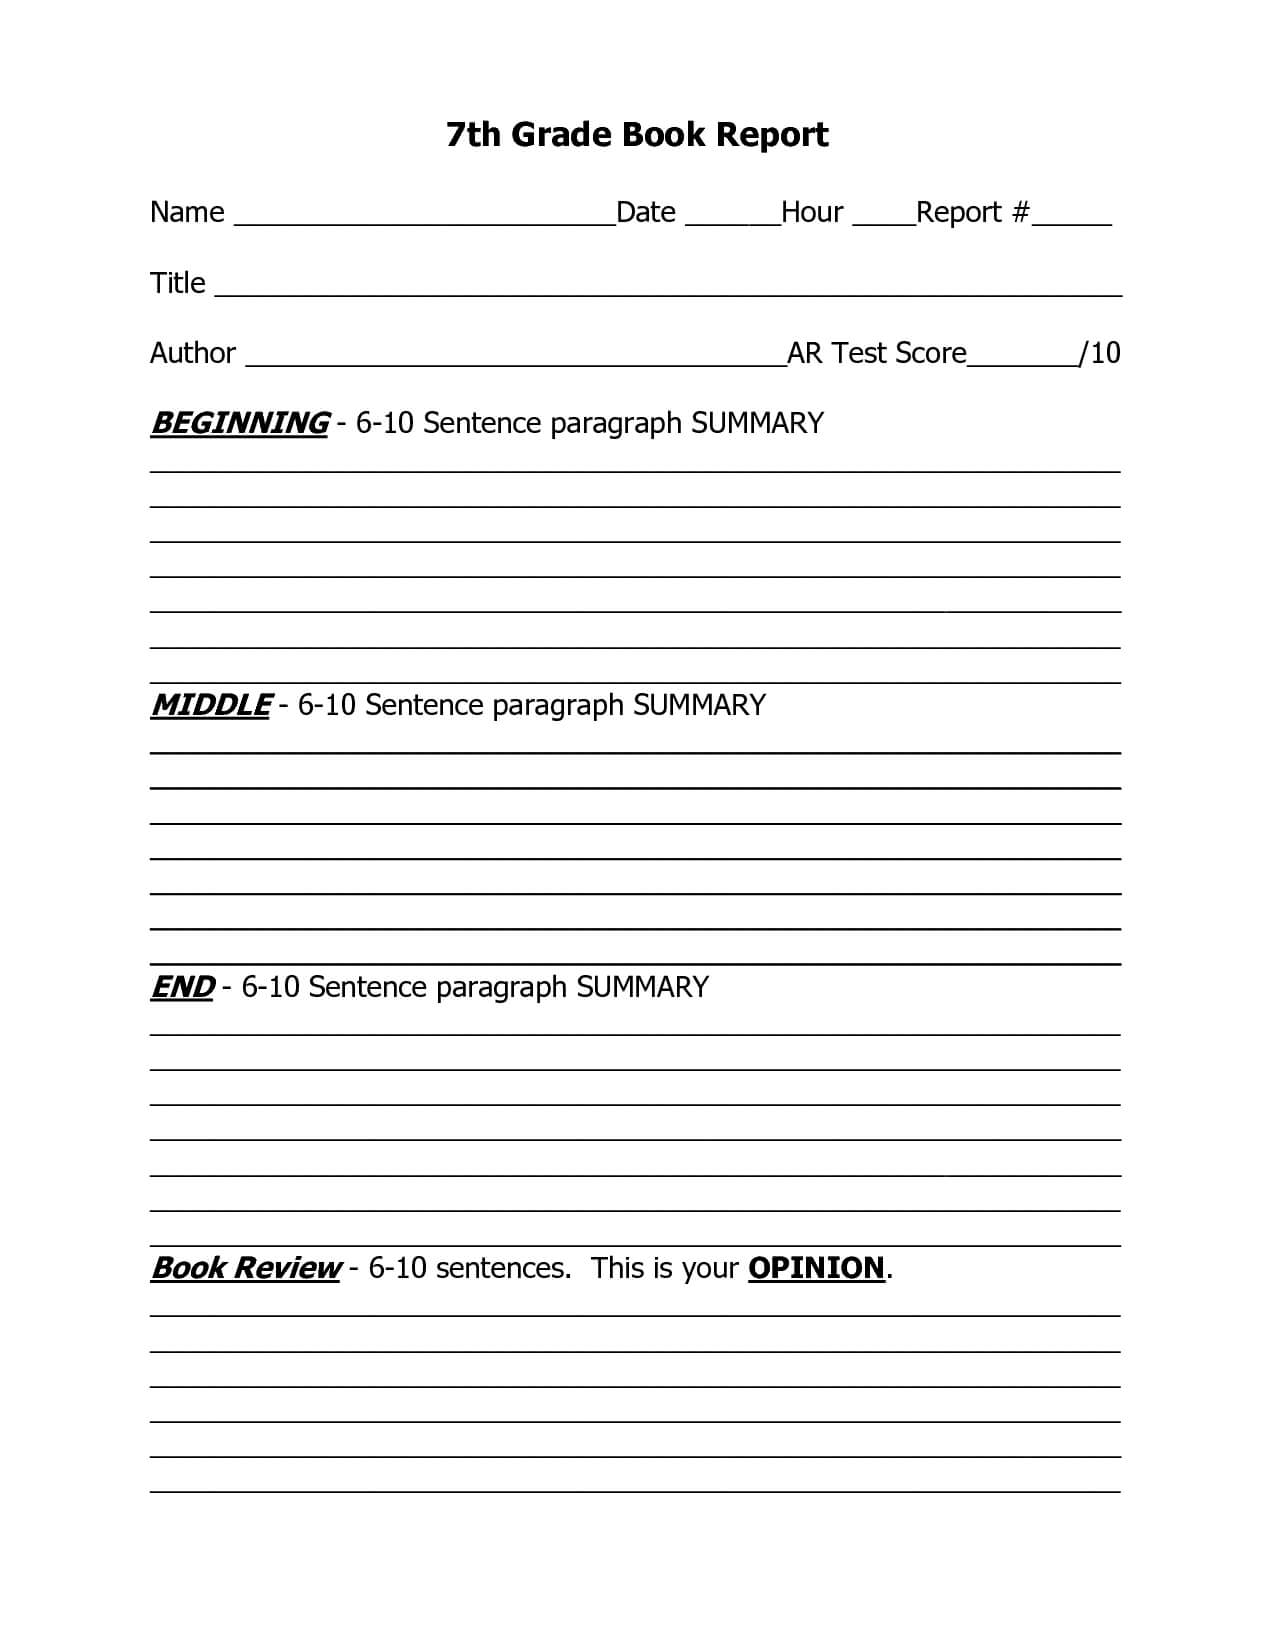 7Th Grade Book Report Outline Template | Book Report Intended For Ar Report Template